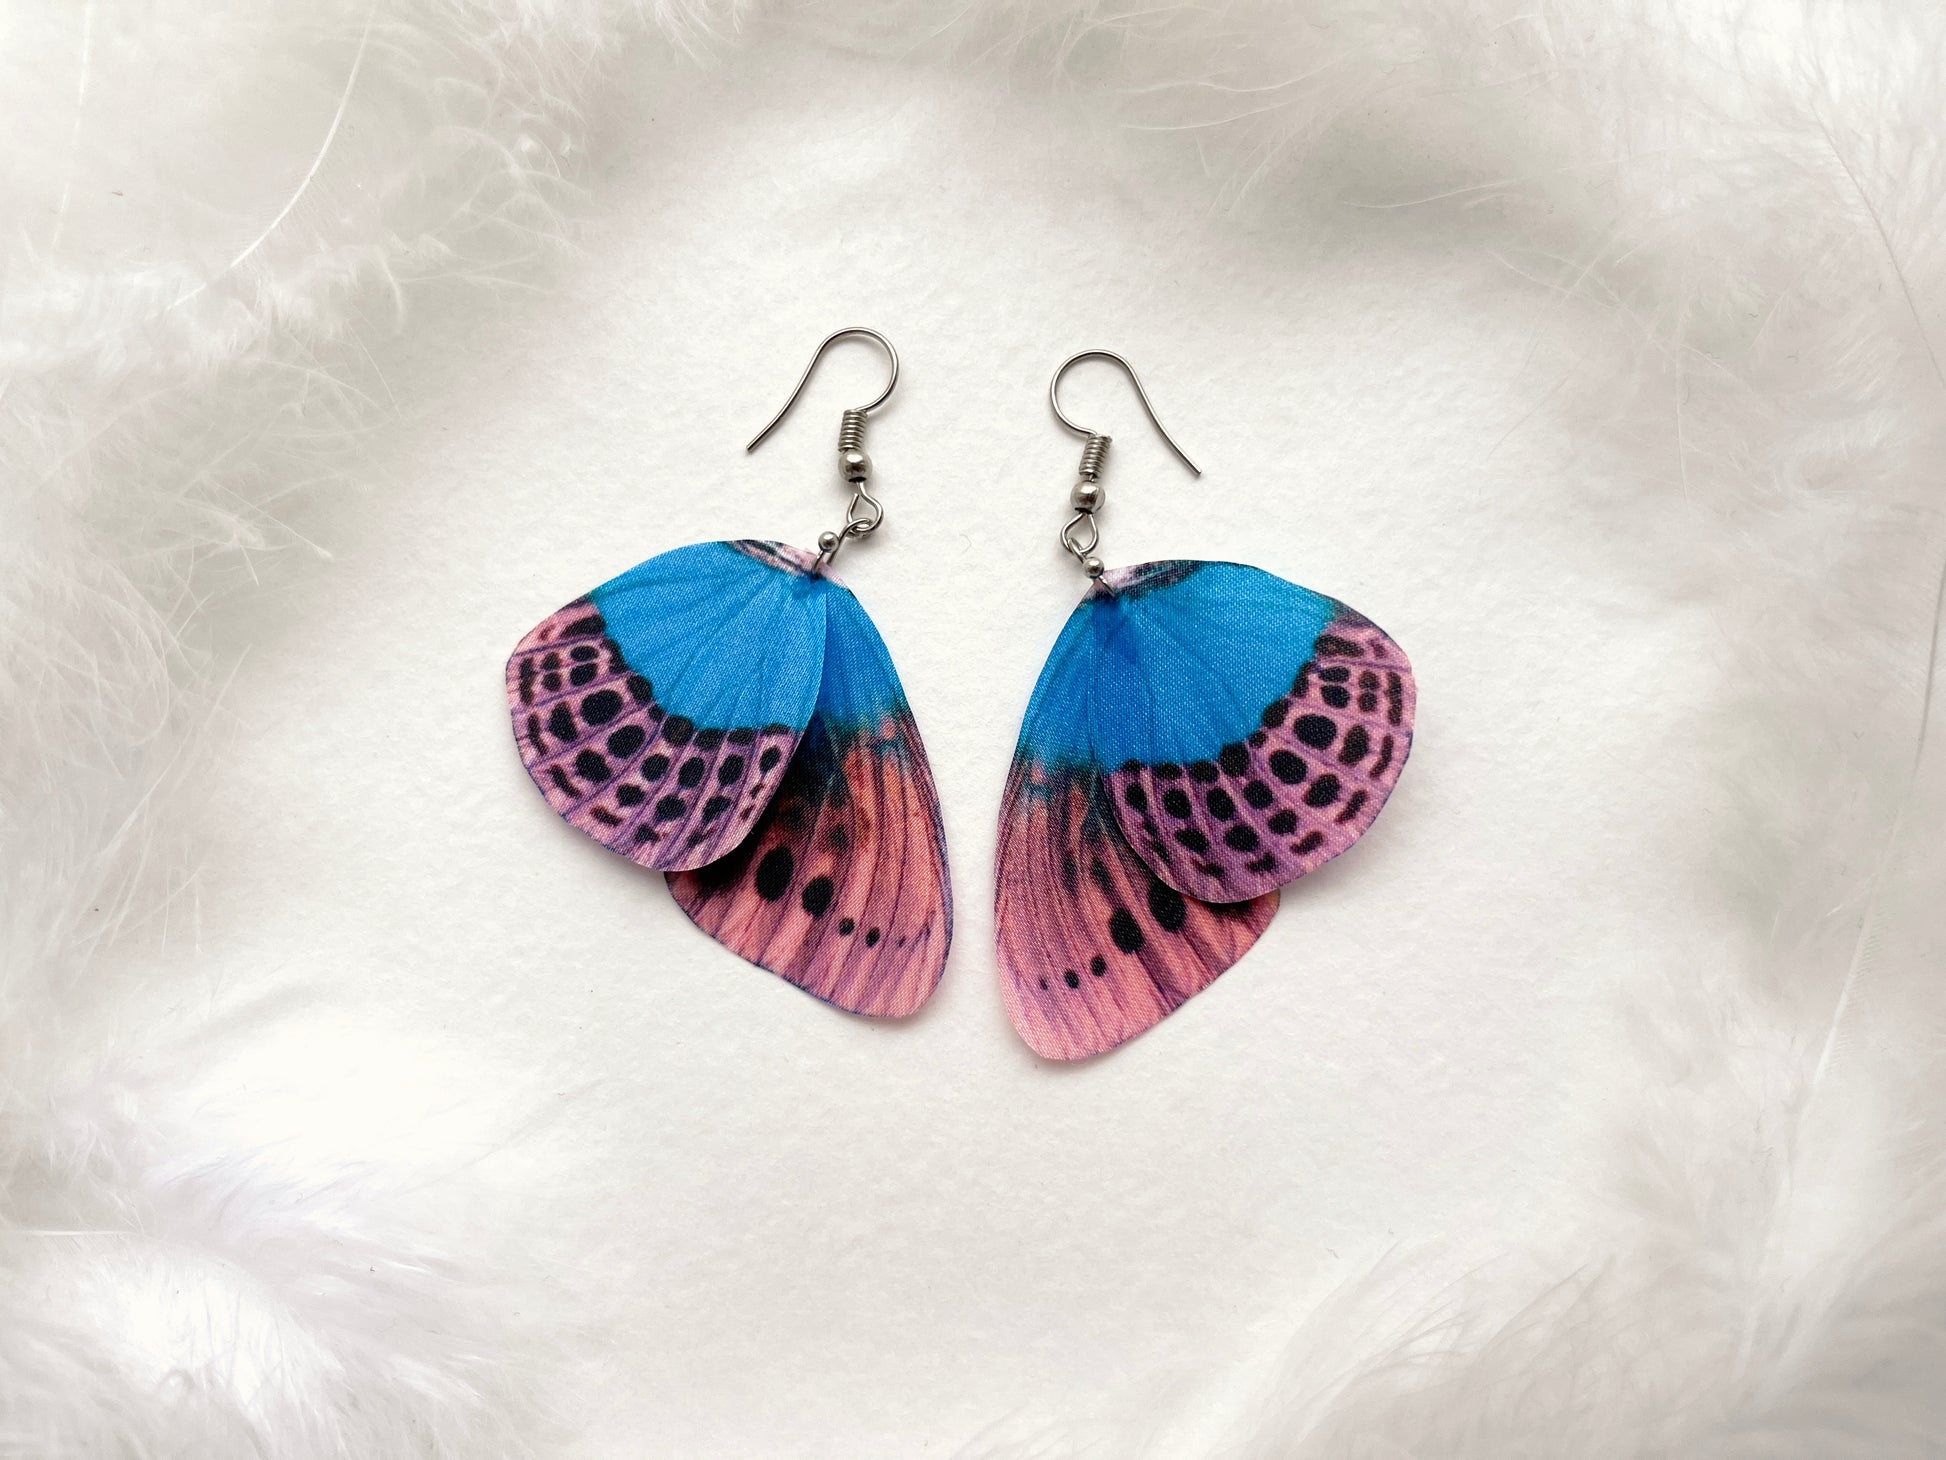 Unique butterfly earrings with pink and leopard spots